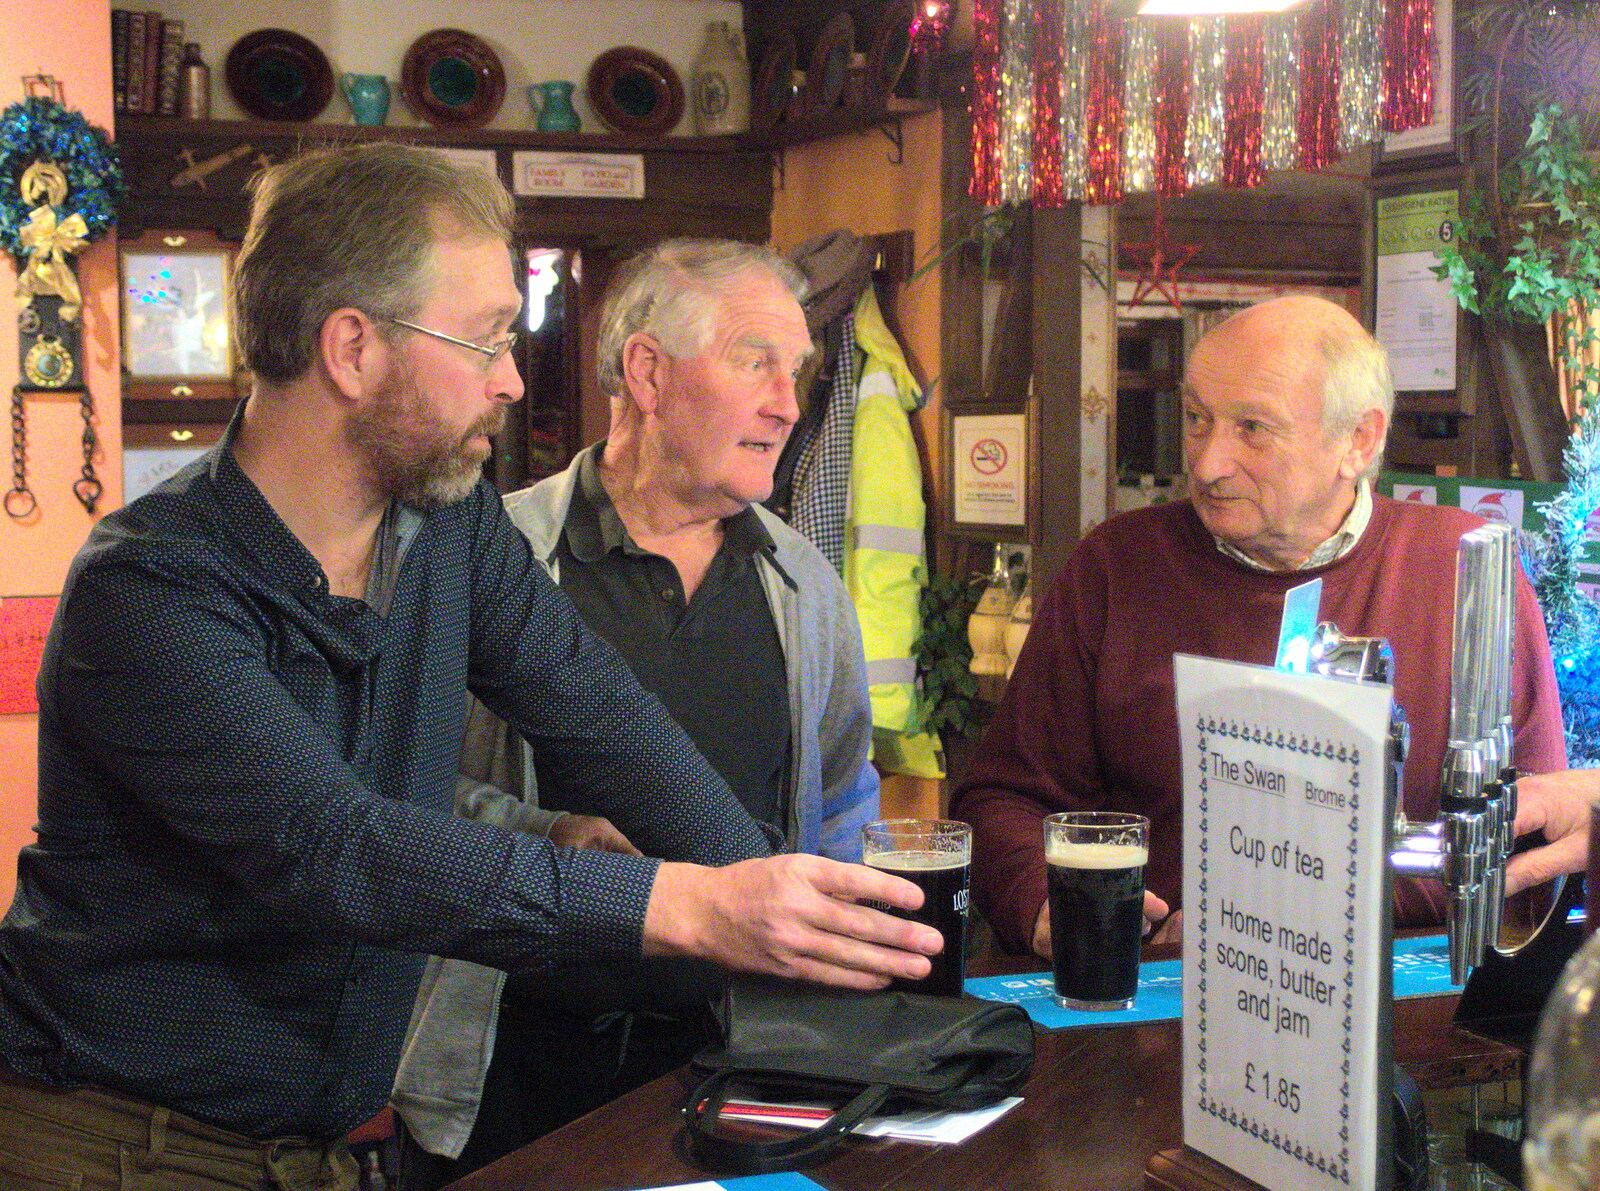 The BSCC Christmas Dinner at The Swan Inn, Brome, Suffolk - 3rd December 2016: Marc, Bernie the Bolt and Mick the Brick